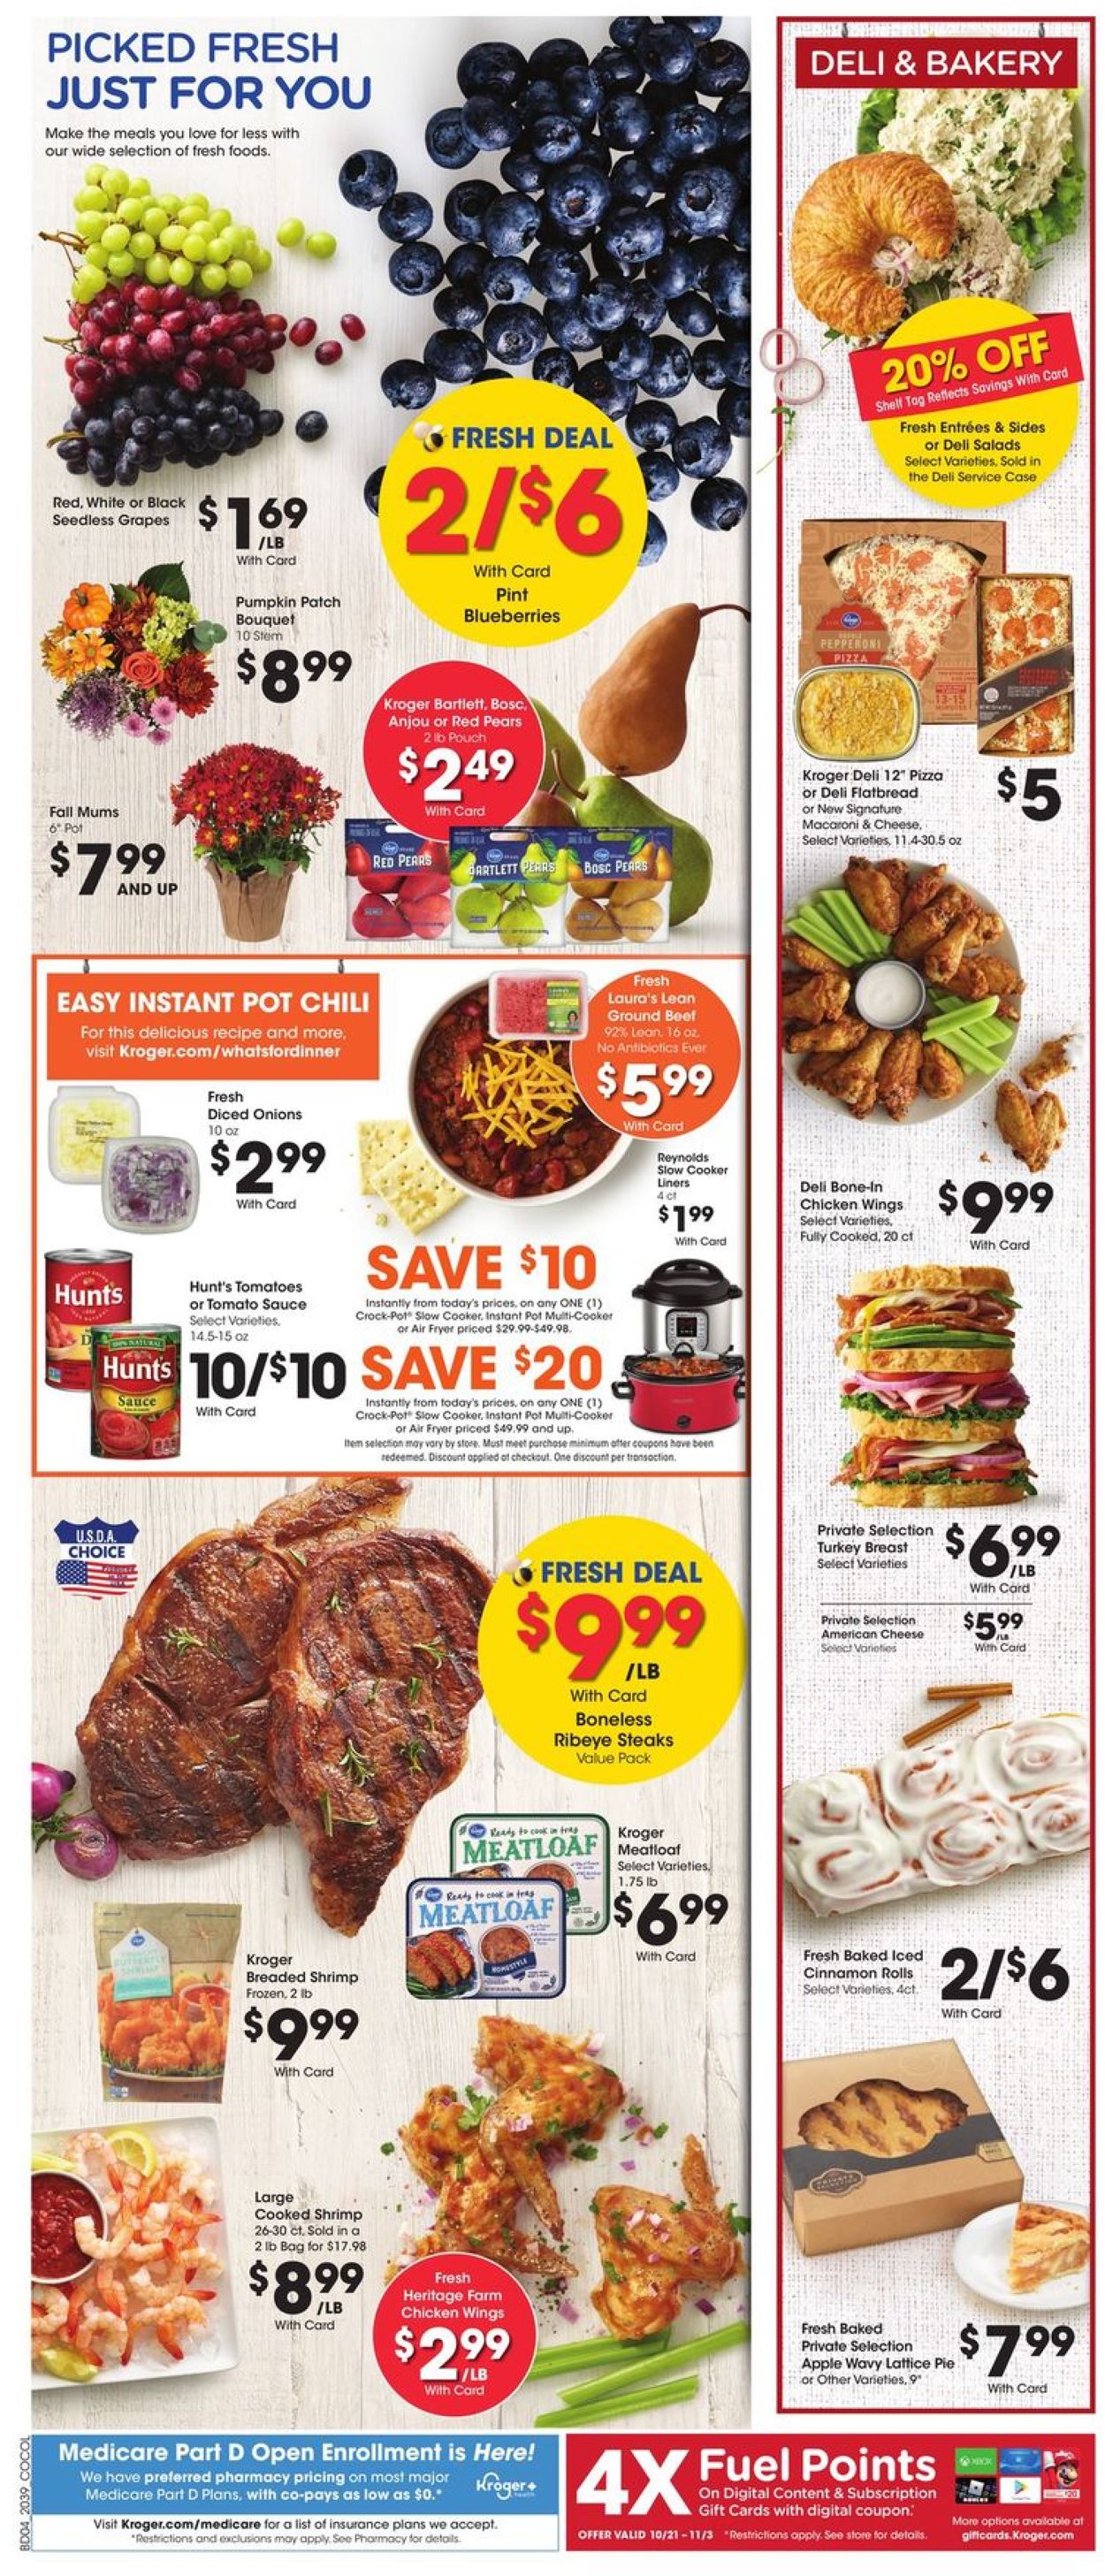 Kroger Current weekly ad 10/28 11/03/2020 [7]